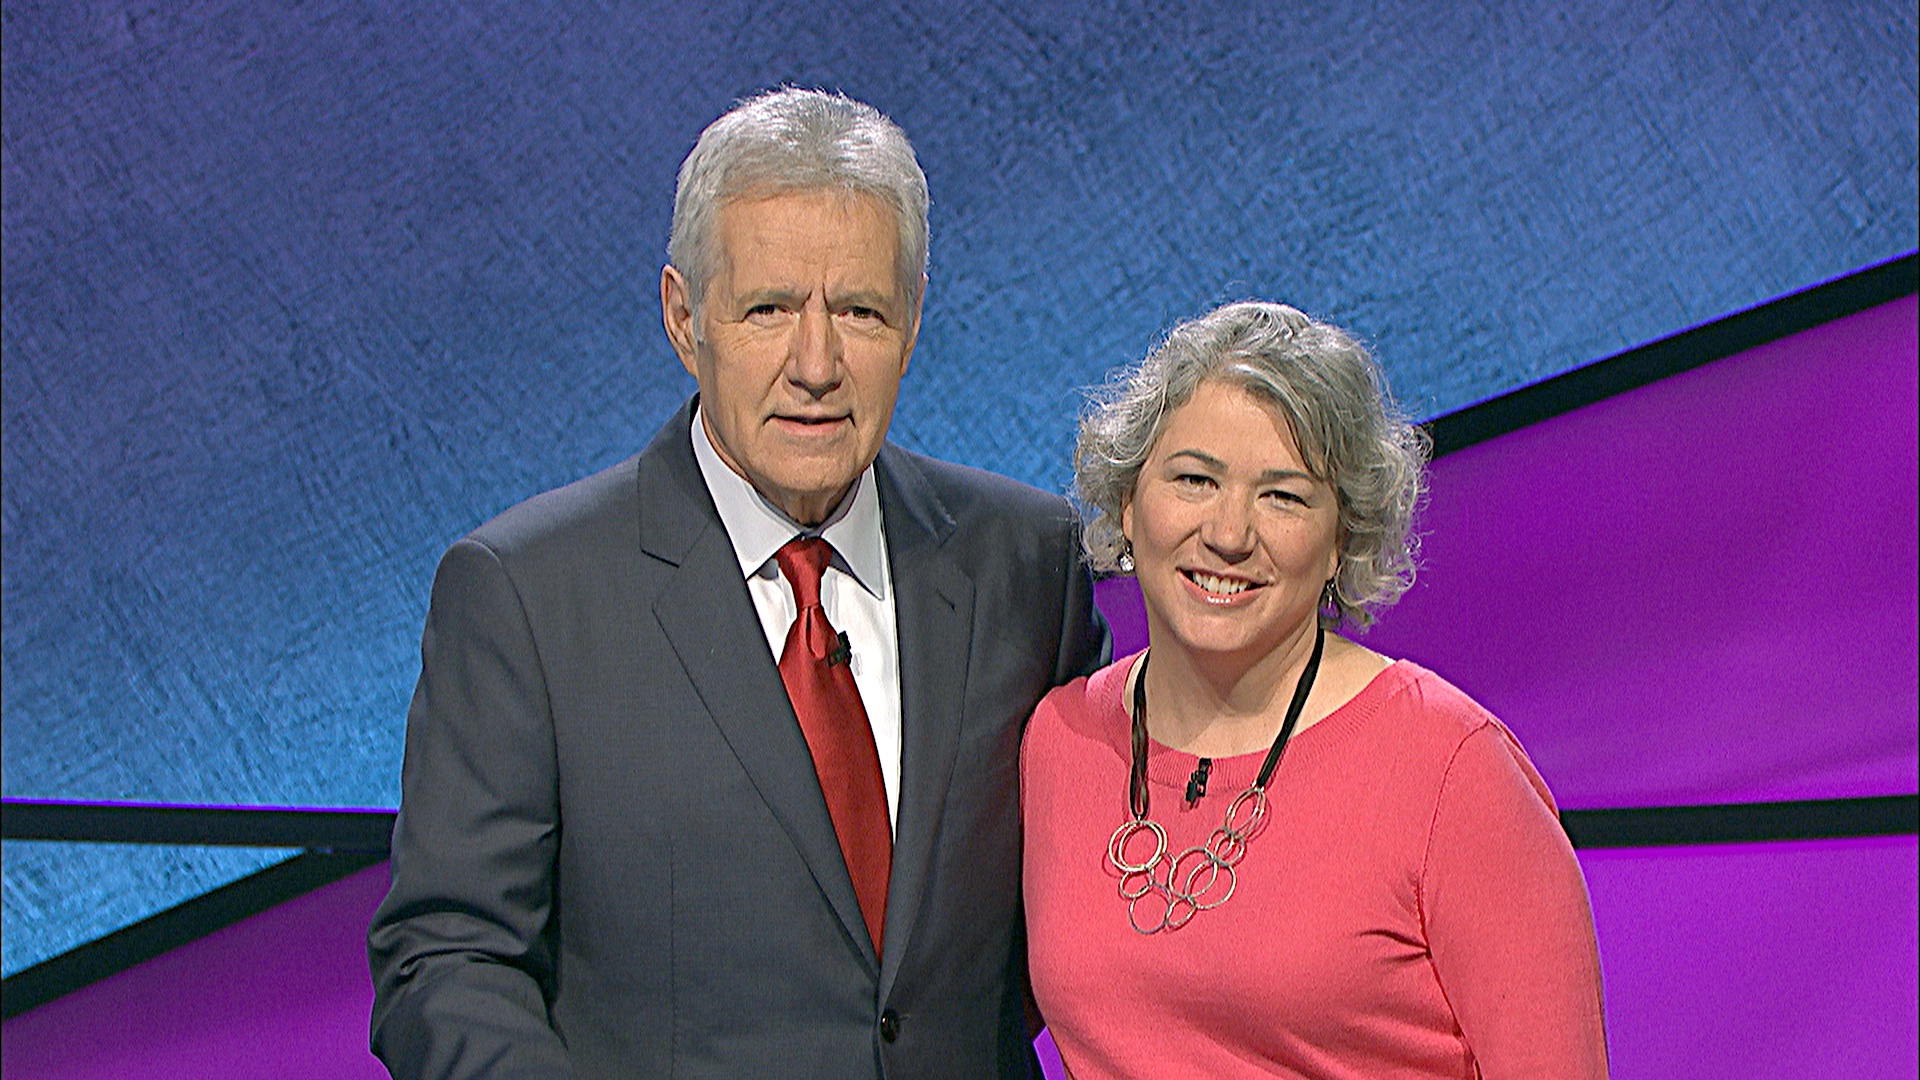 Kirkland resident Liz Hedreen stands with Jeopardy host Alex Trebek. Hedreen was a contestant on the show earlier this week. Contributed photo